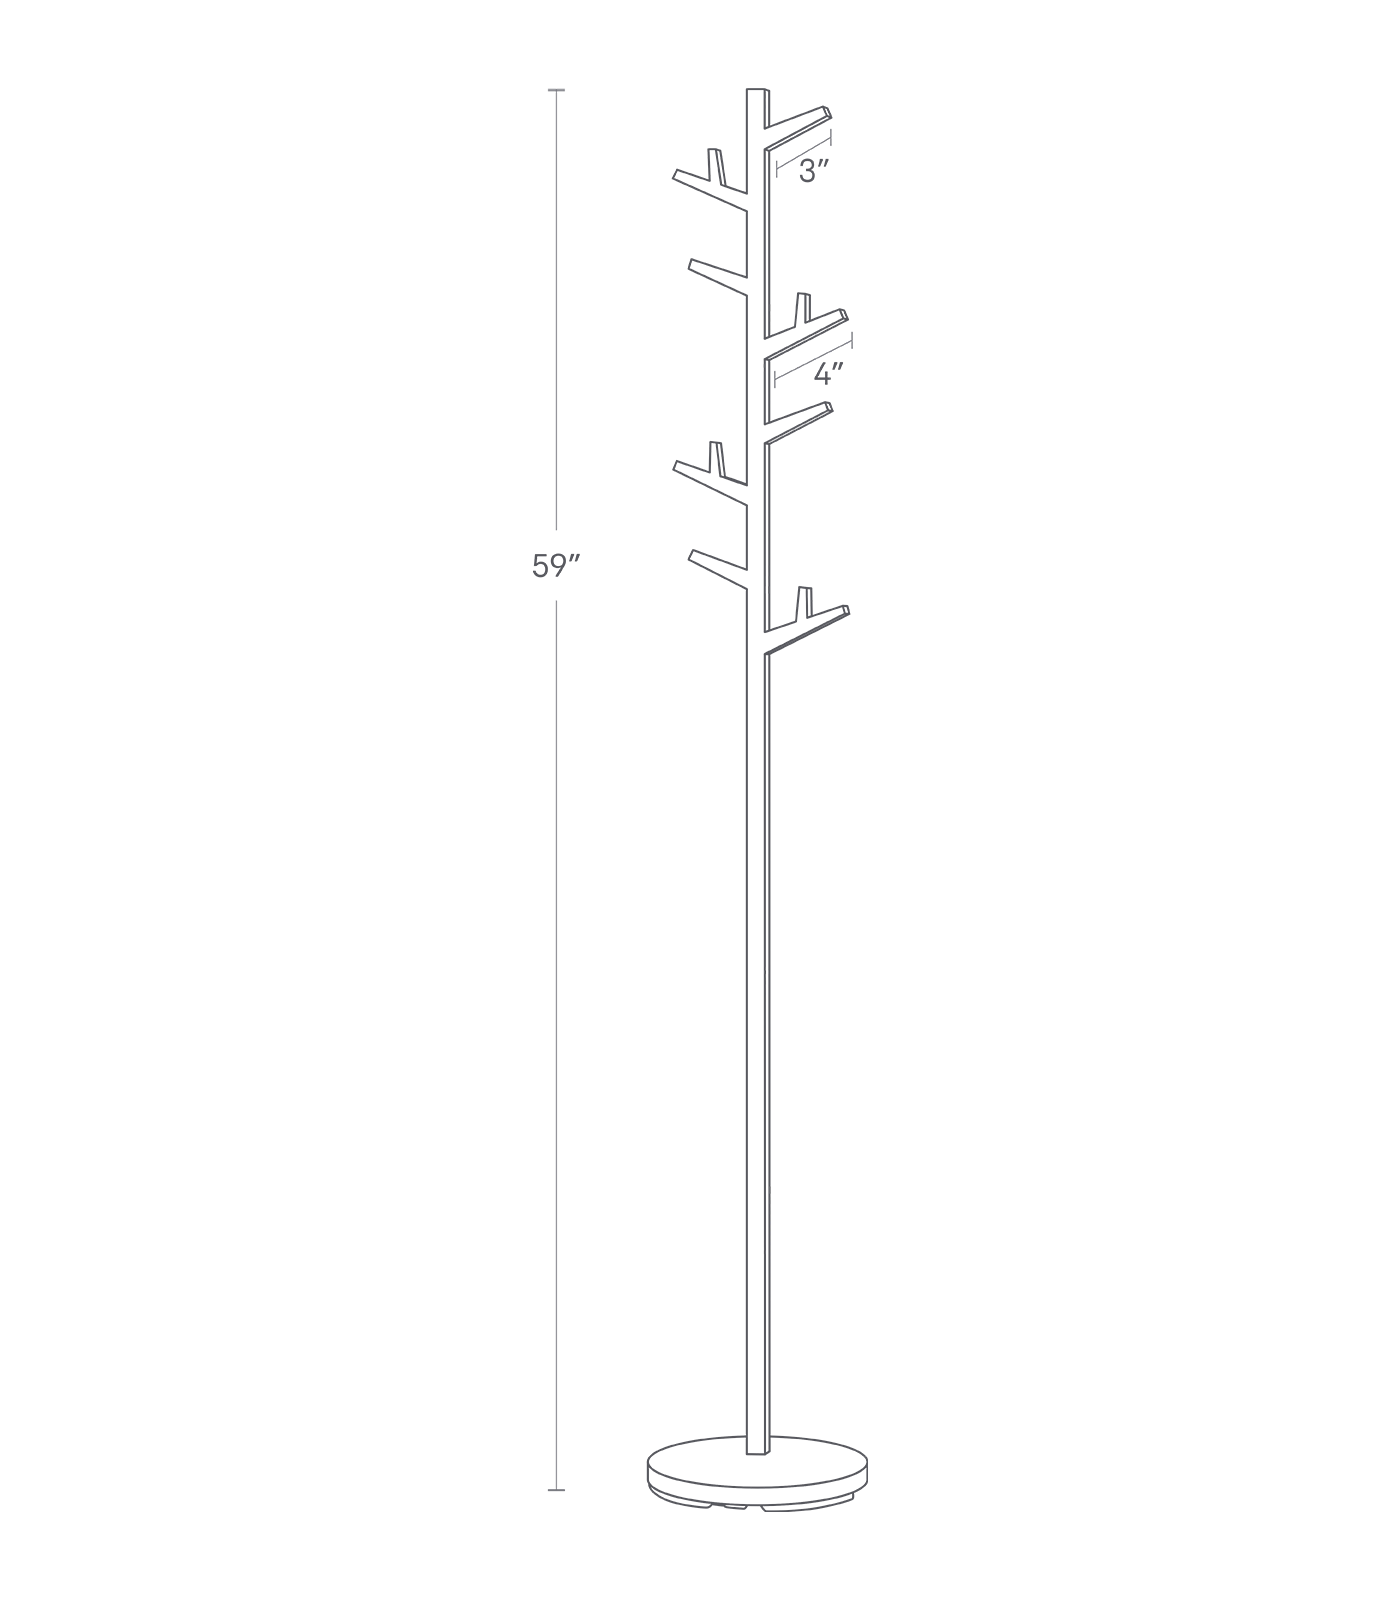 Dimension image for Coat Rack showing a total height of 59